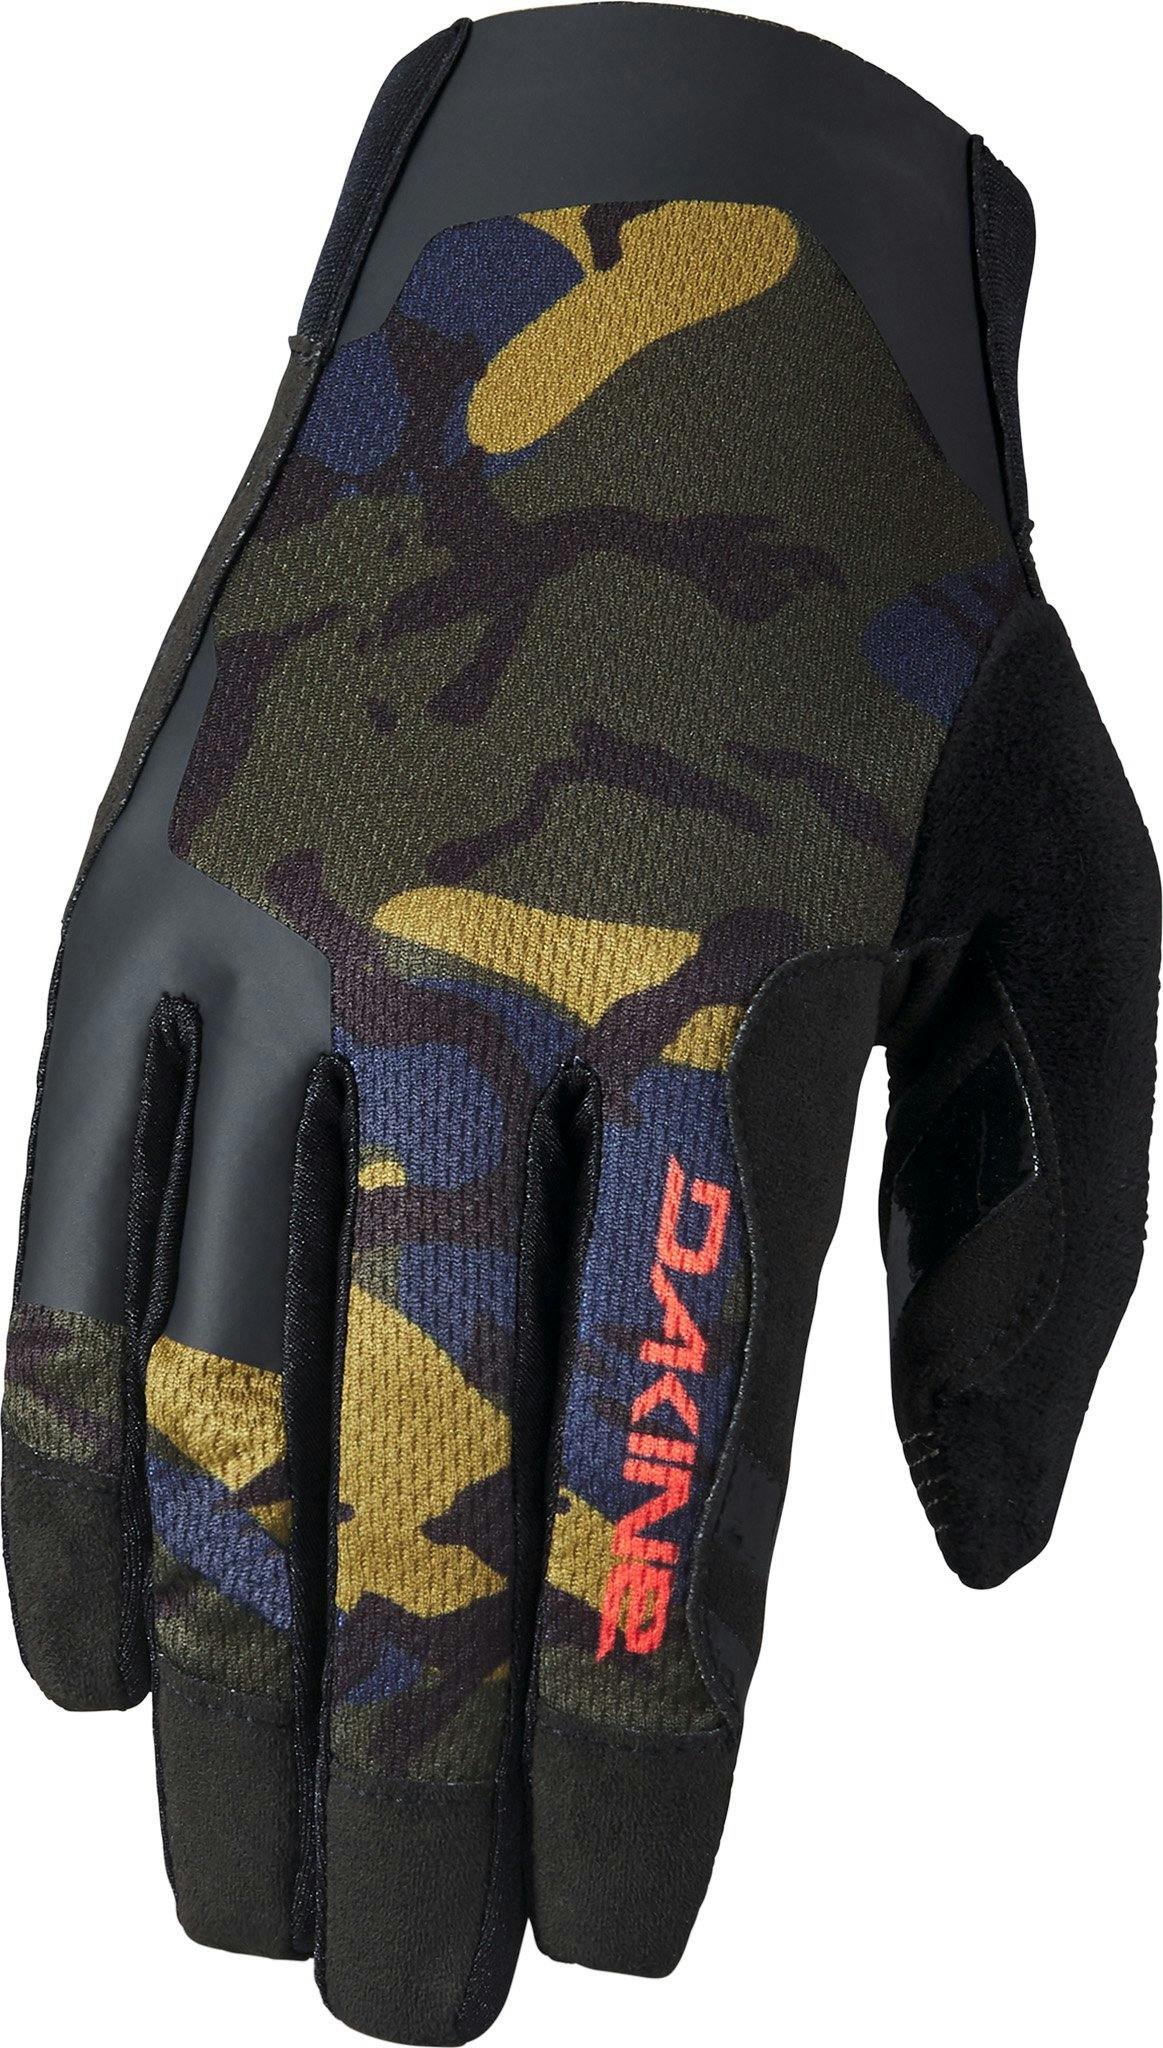 Product image for Covert Gloves - Unisex